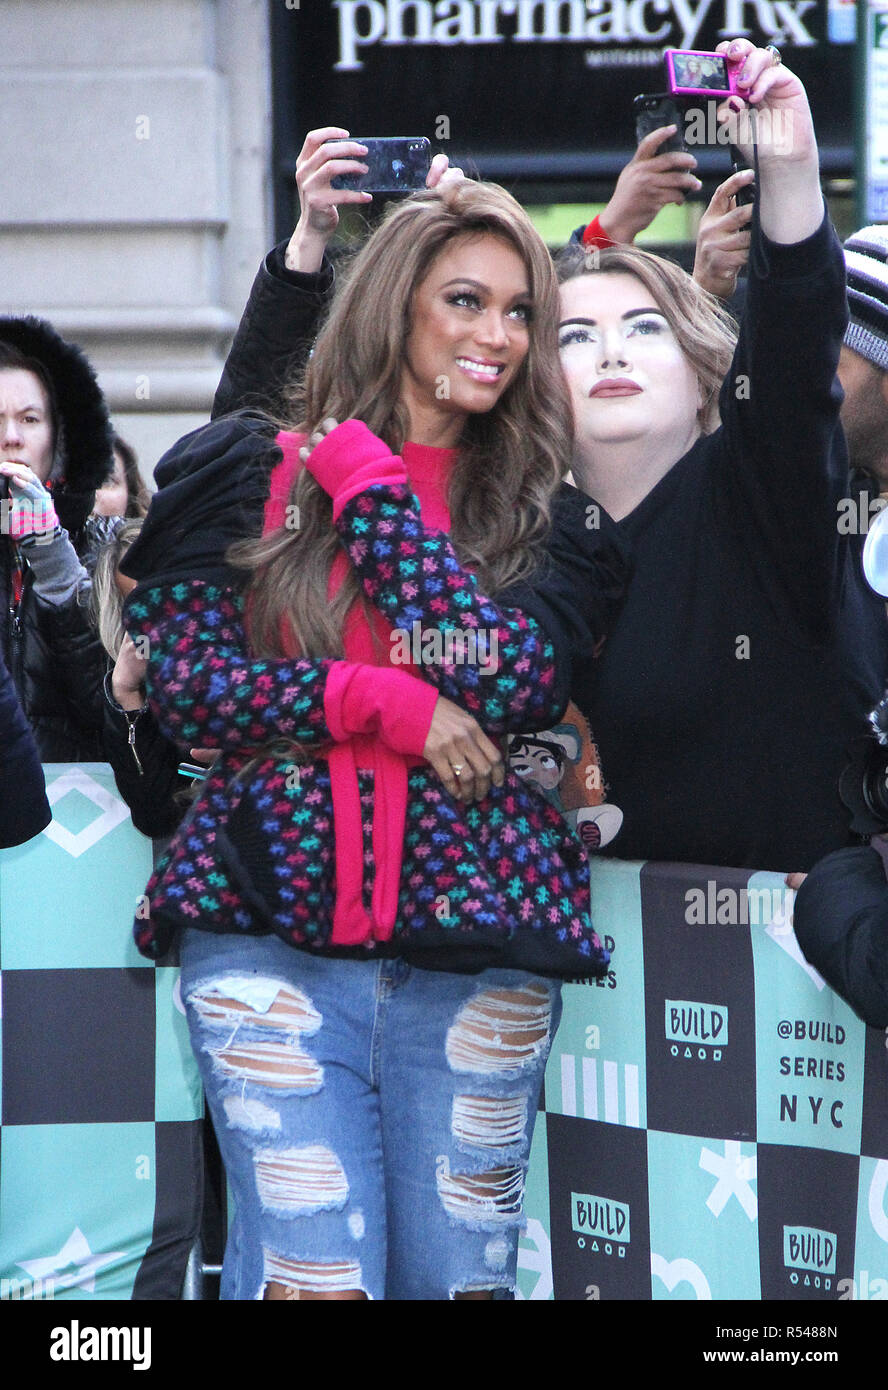 New York, NY, USA. 29th Nov, 2018. Tyra Banks at Build Series promoting her new movie Life-Size 2: A Christmas Eve on November 29, 2018 in New York City. Credit: Rw/Media Punch/Alamy Live News Stock Photo